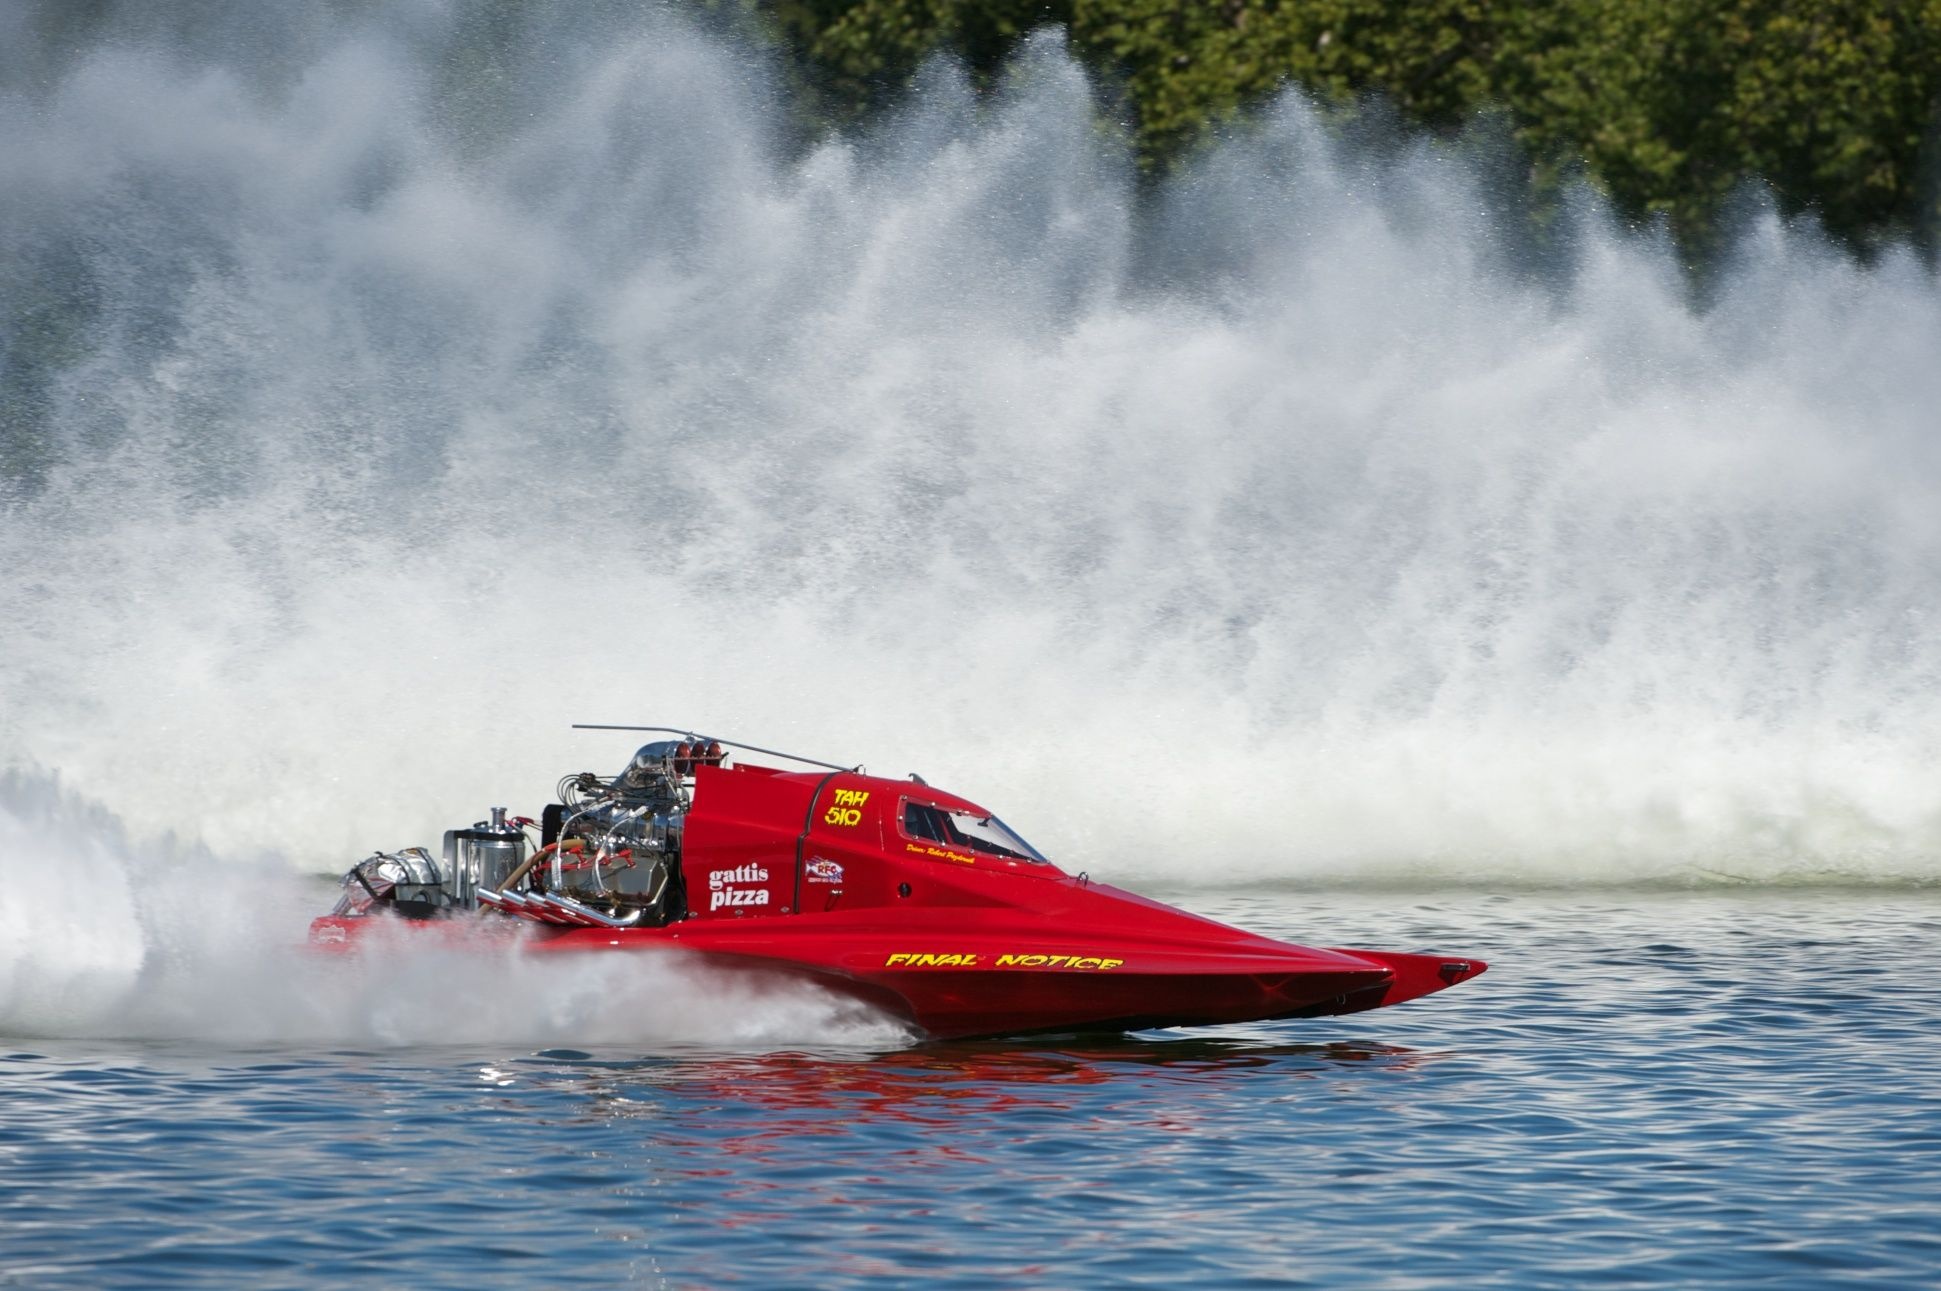 Hydroplane: Boat that can glide along the surface of water at high speeds. 1950x1300 HD Wallpaper.